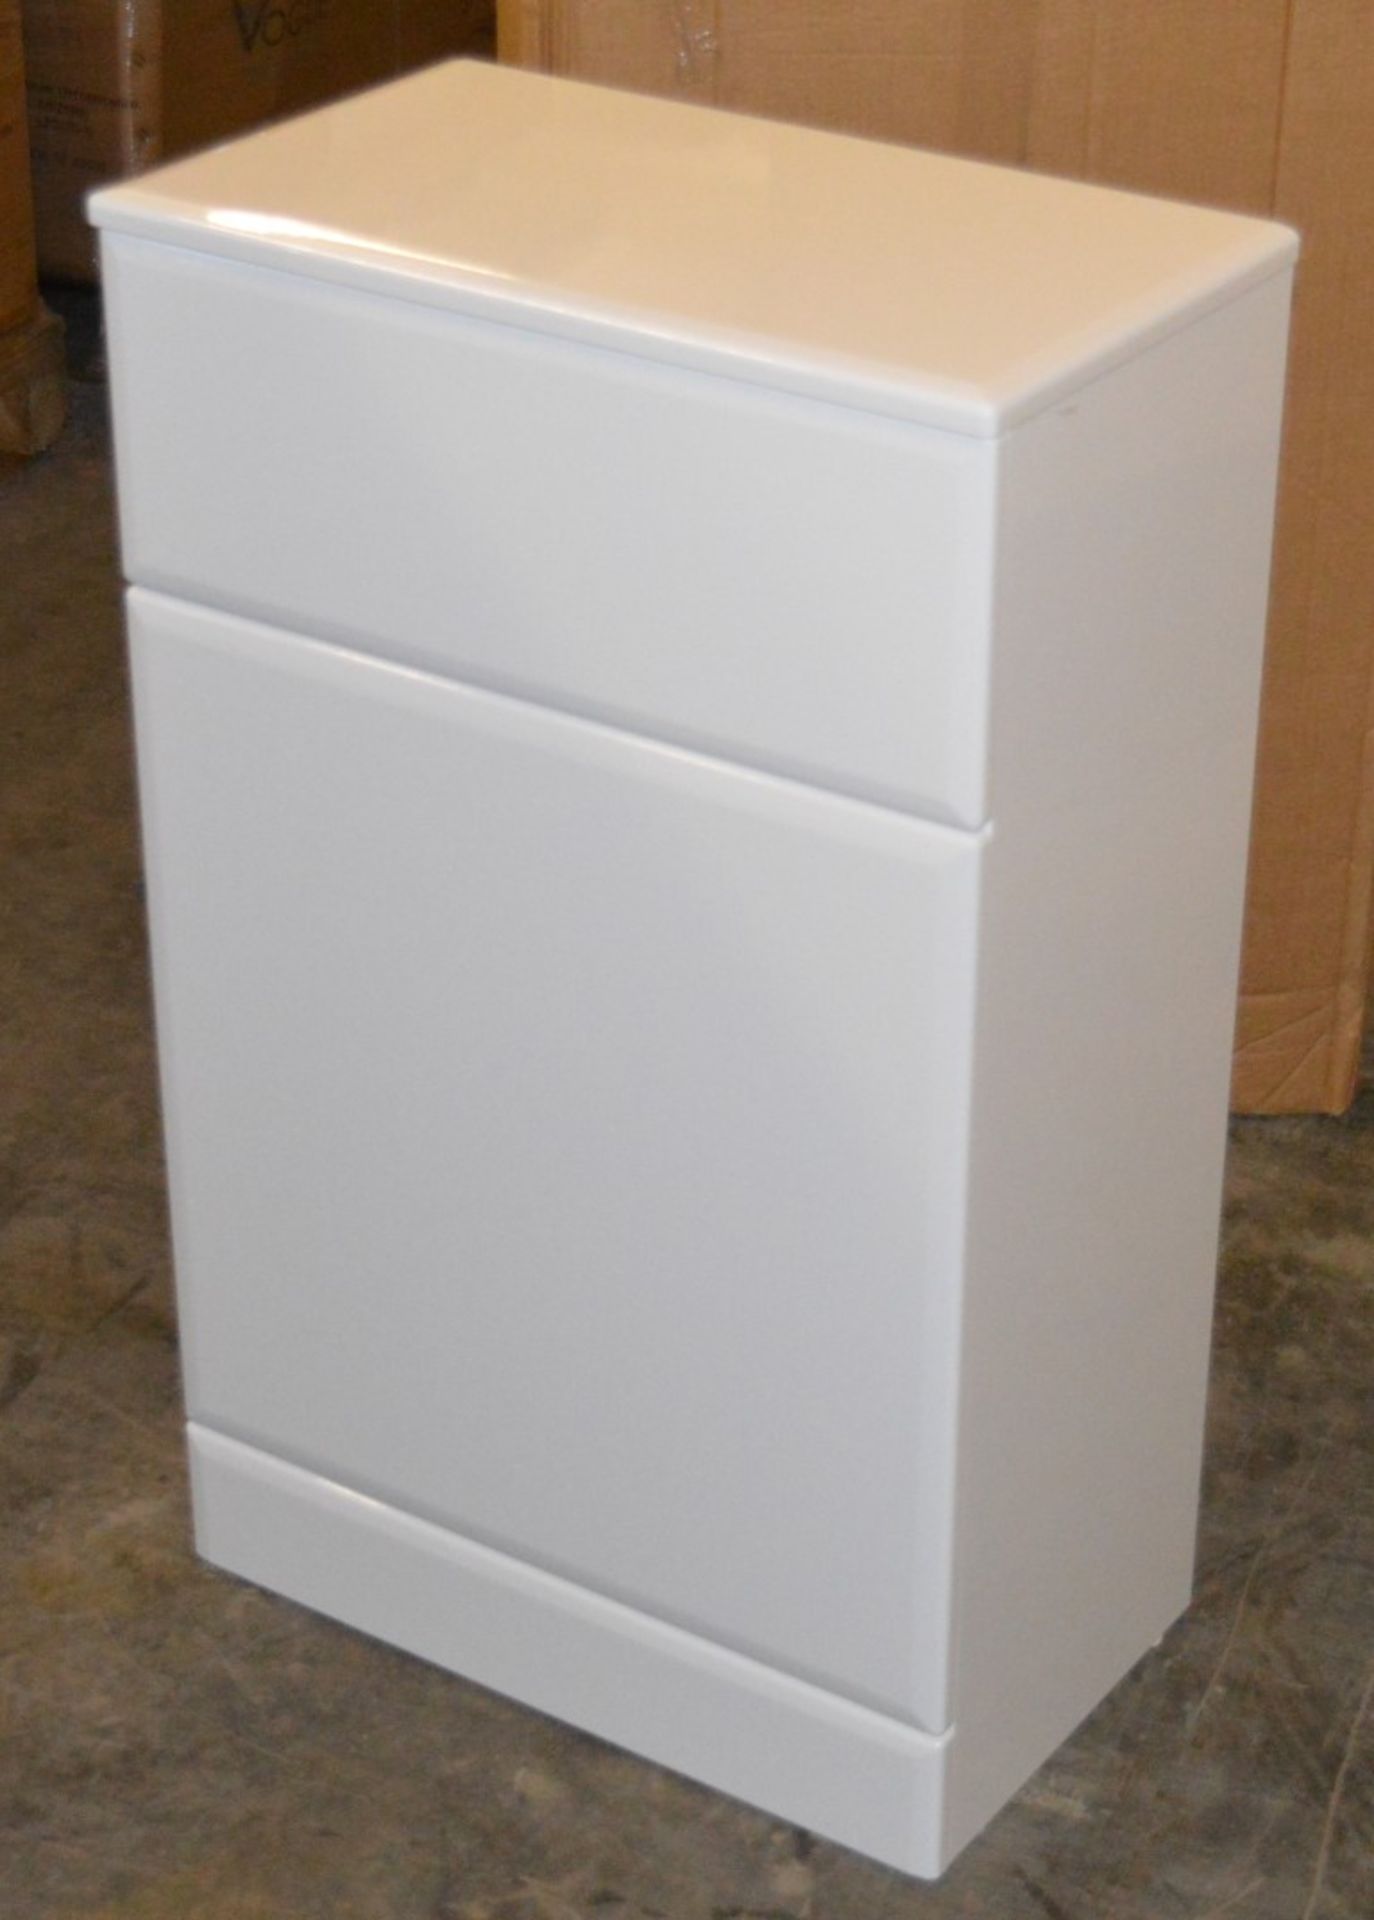 10 x Venizia BTW Toilet Pan Units in Gloss White With Concealed Cisterns - 500mm Width - Includes - Image 4 of 7